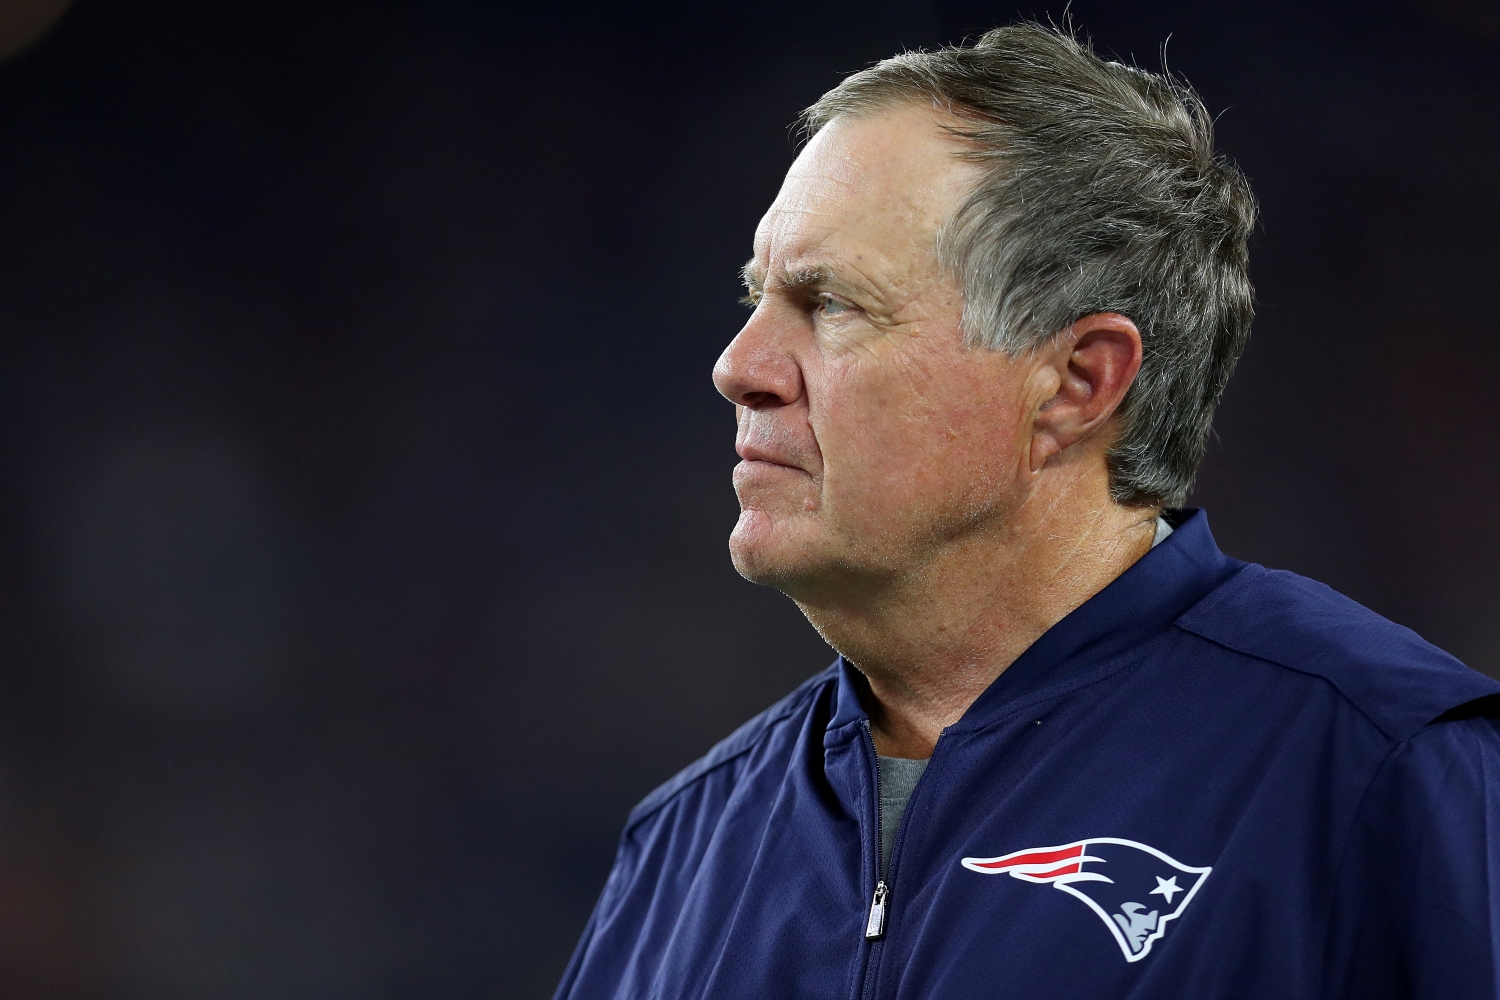 New England Patriots head coach Bill Belichick looks on during a game.